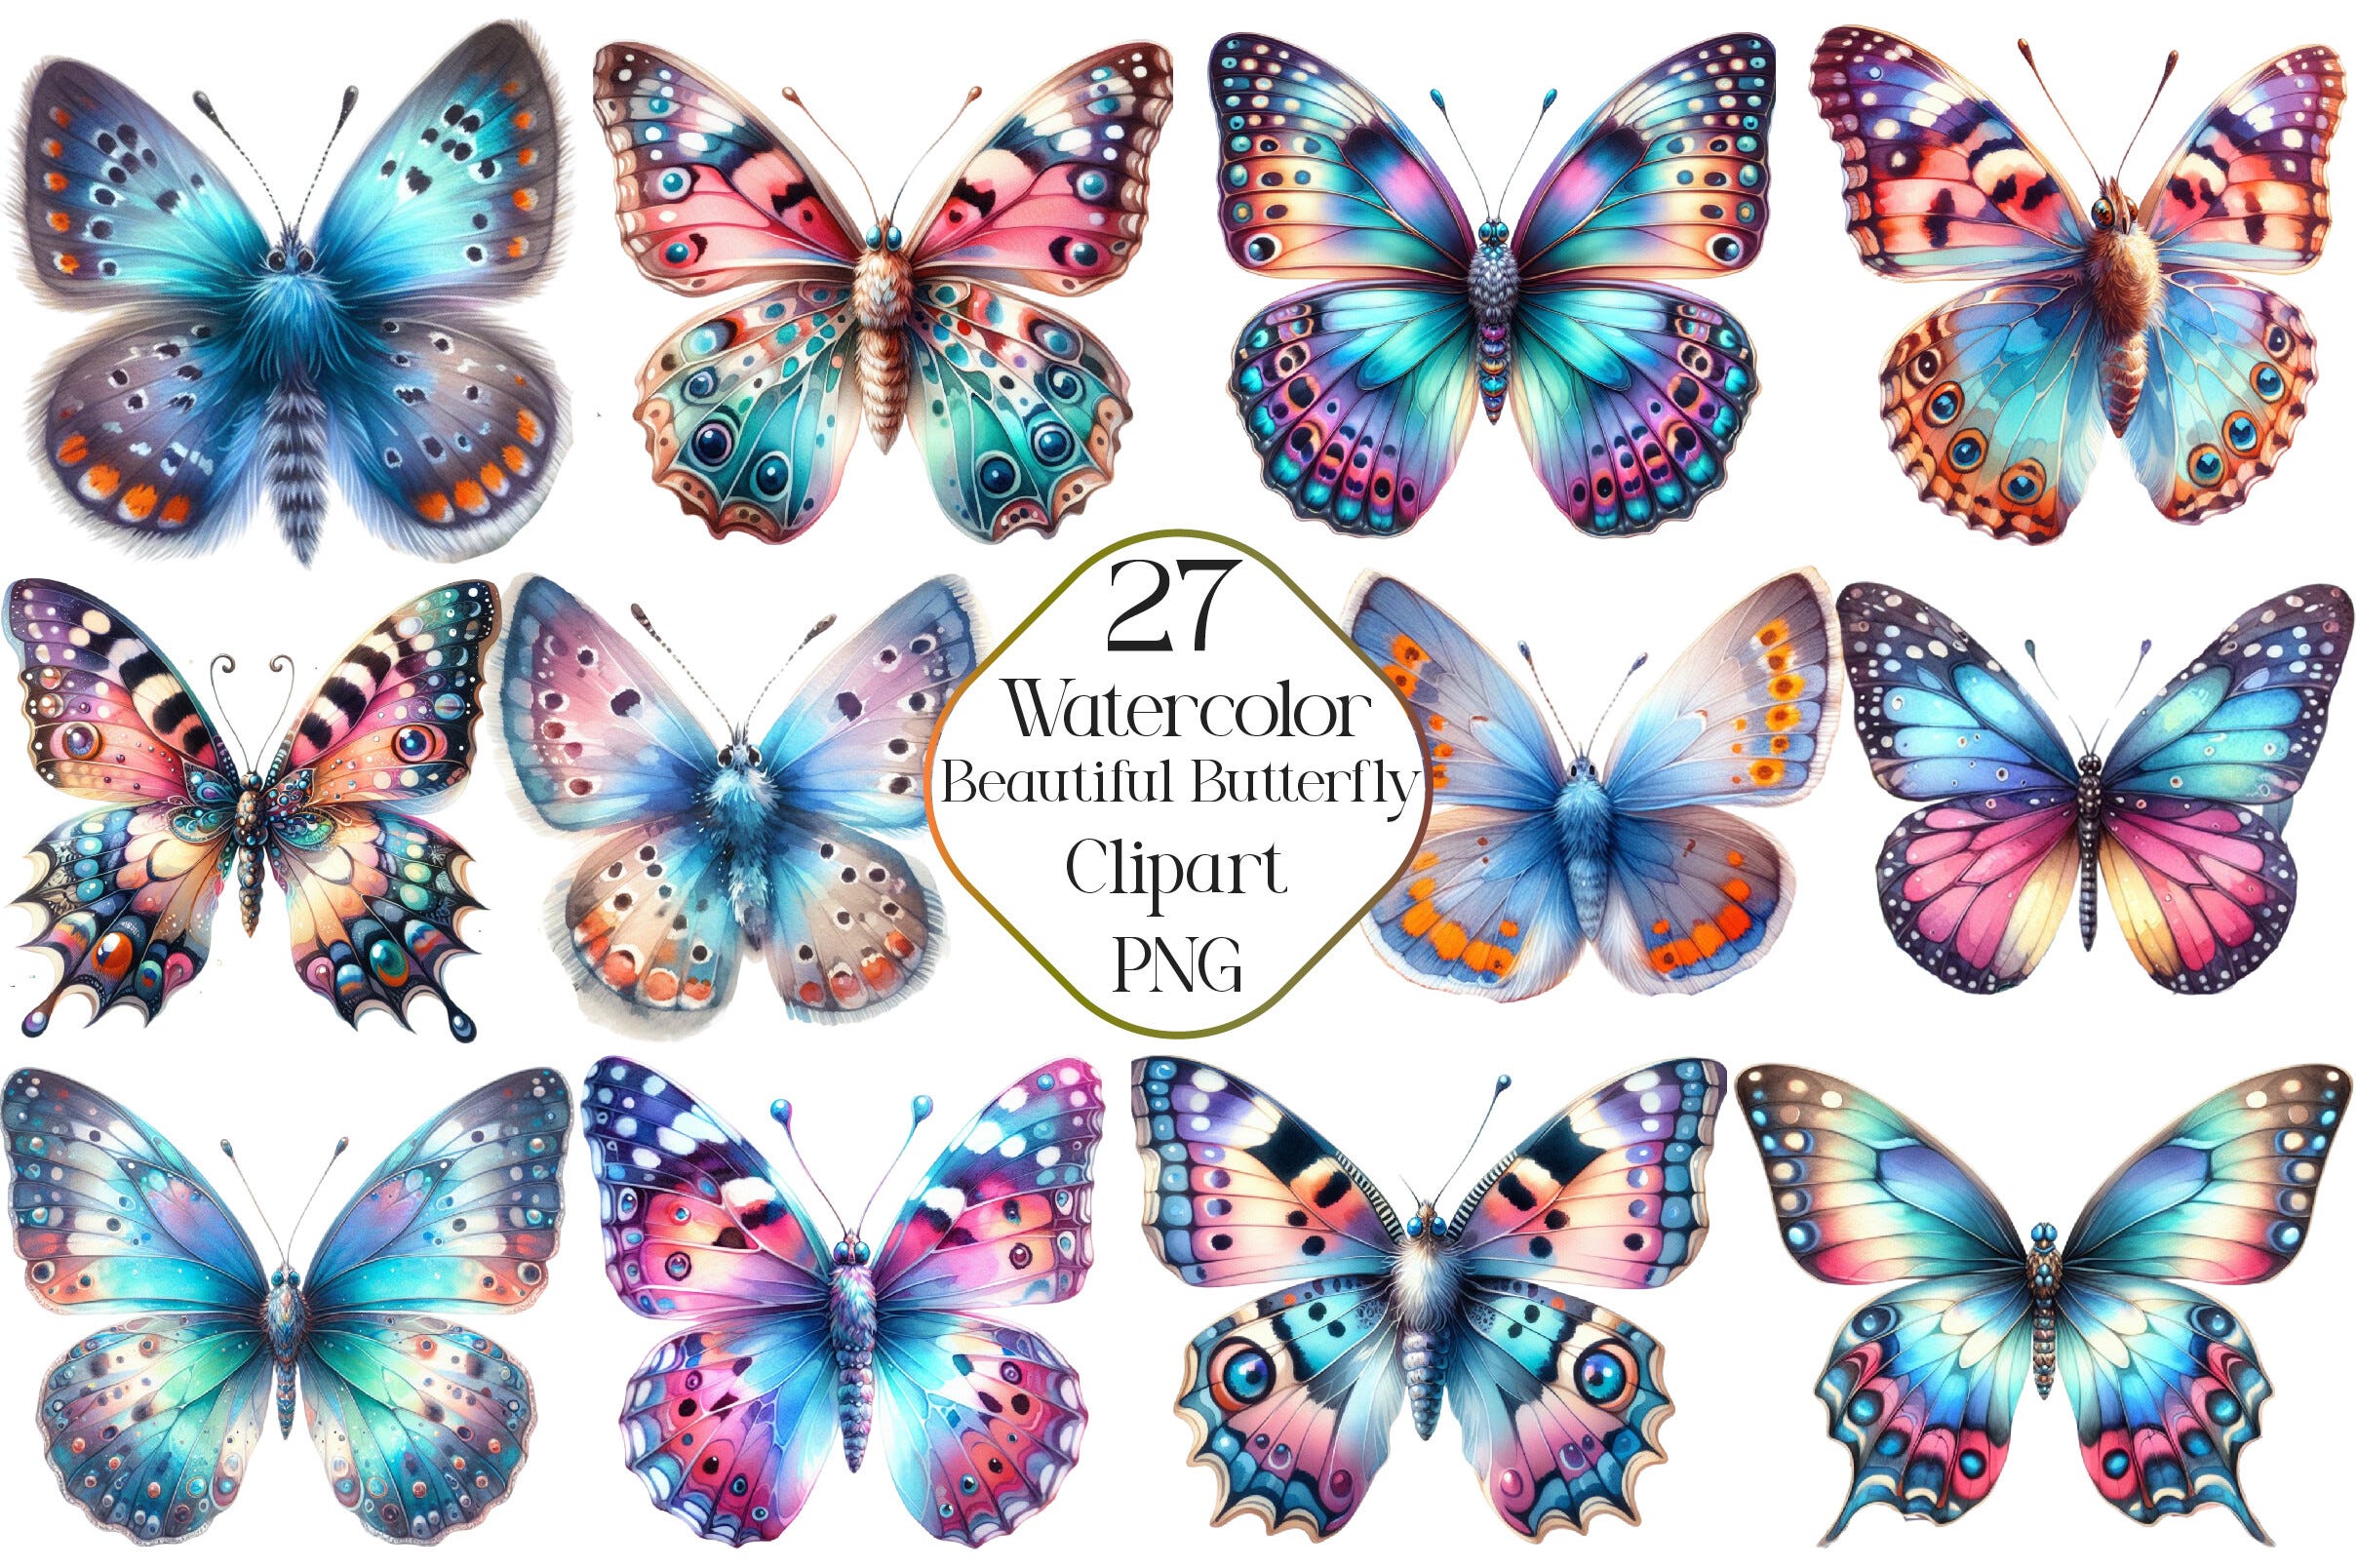 Watercolor Beautiful Butterfly Clipart (Printable Illustrations)